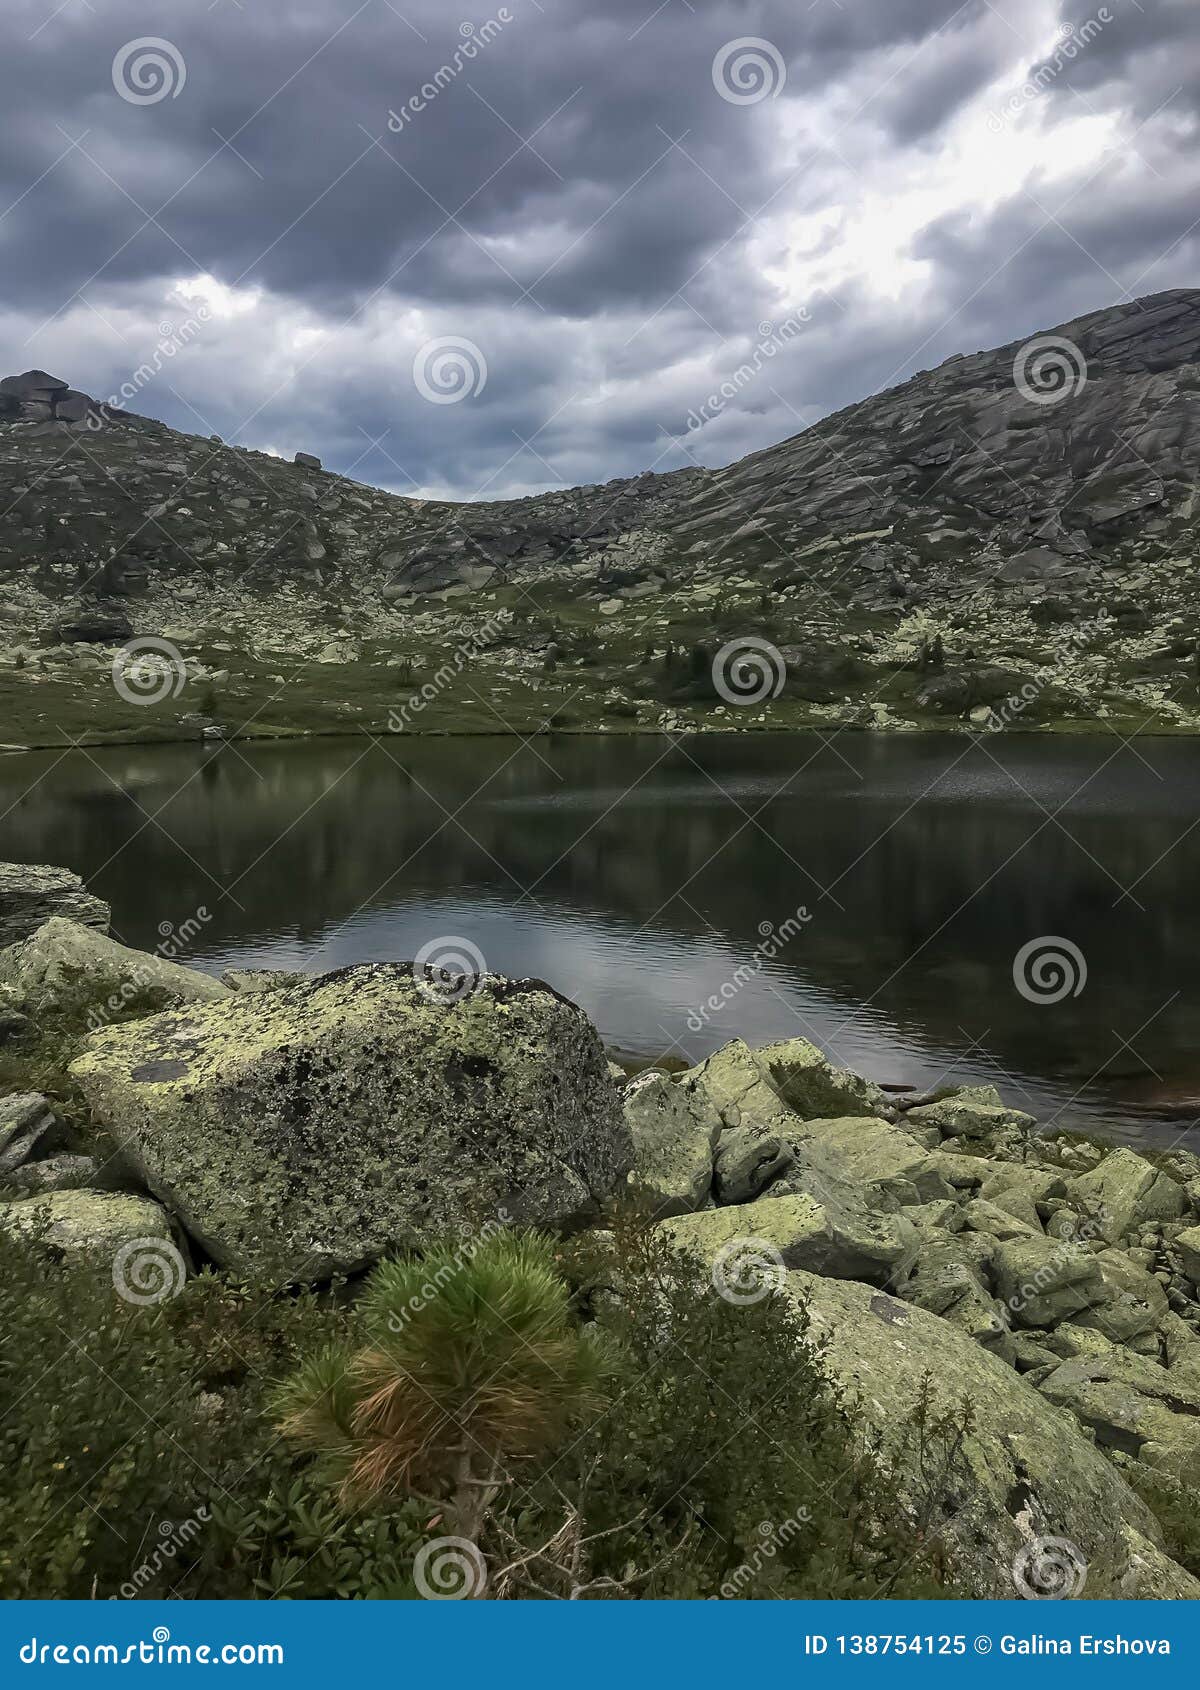 lake view with cloudy sky and mountain in siberia